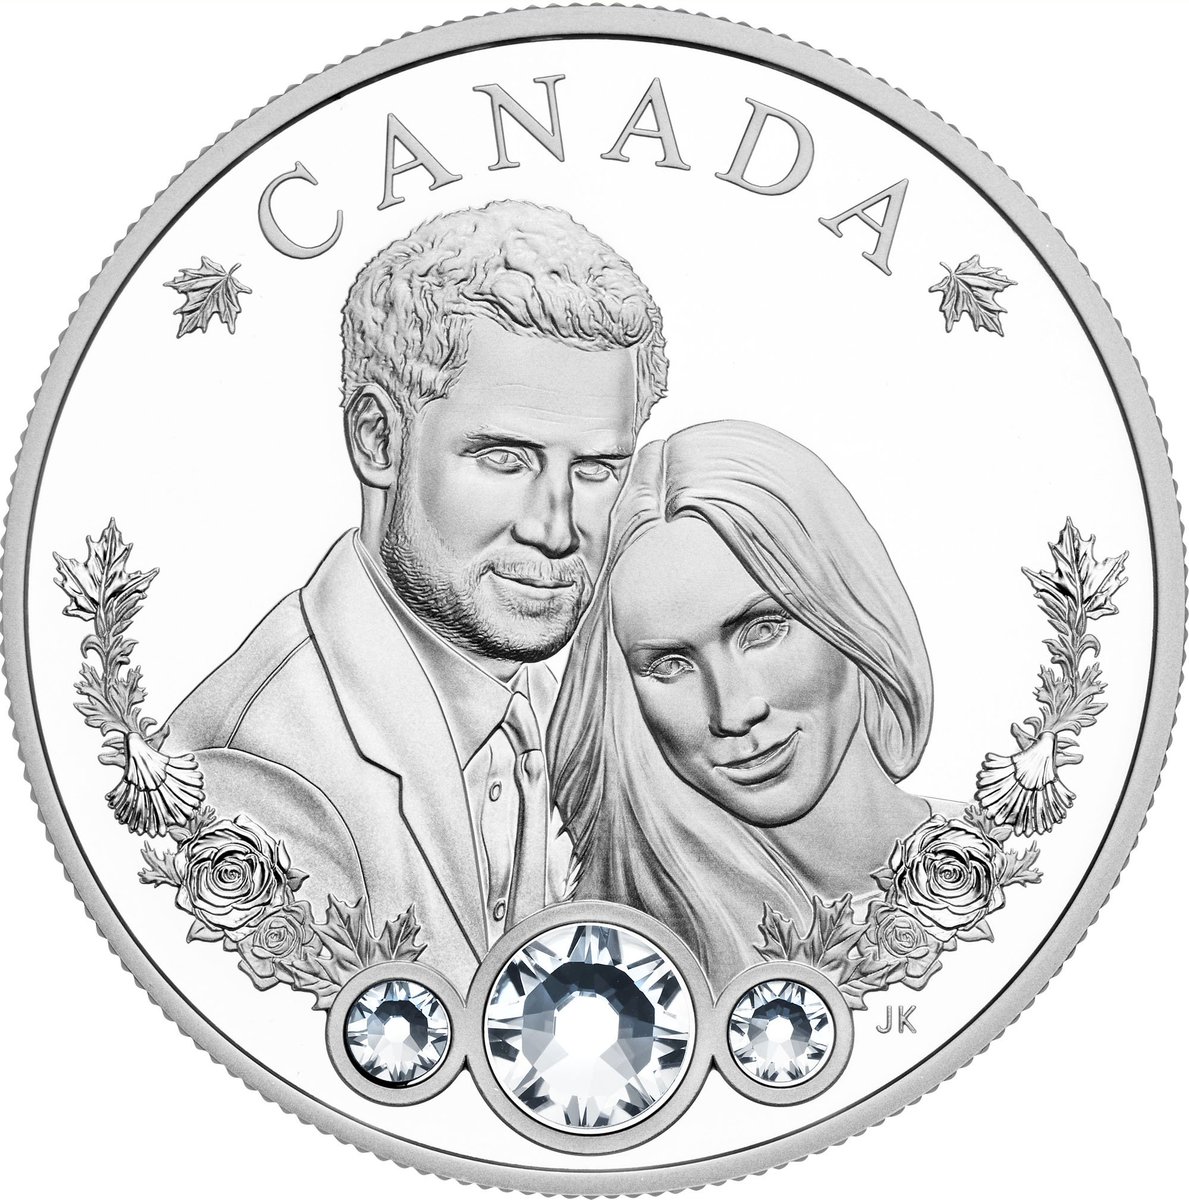 Westport artist, Joel Kimmel, creates Royal Canadian Mint collector coin commemorating the Royal Wedding. It was unveiled today in Toronto.
insideottawavalley.com/community-stor… #RoyalWedding2018 #commemorative #RoyalCanadianMint @joelkimmel